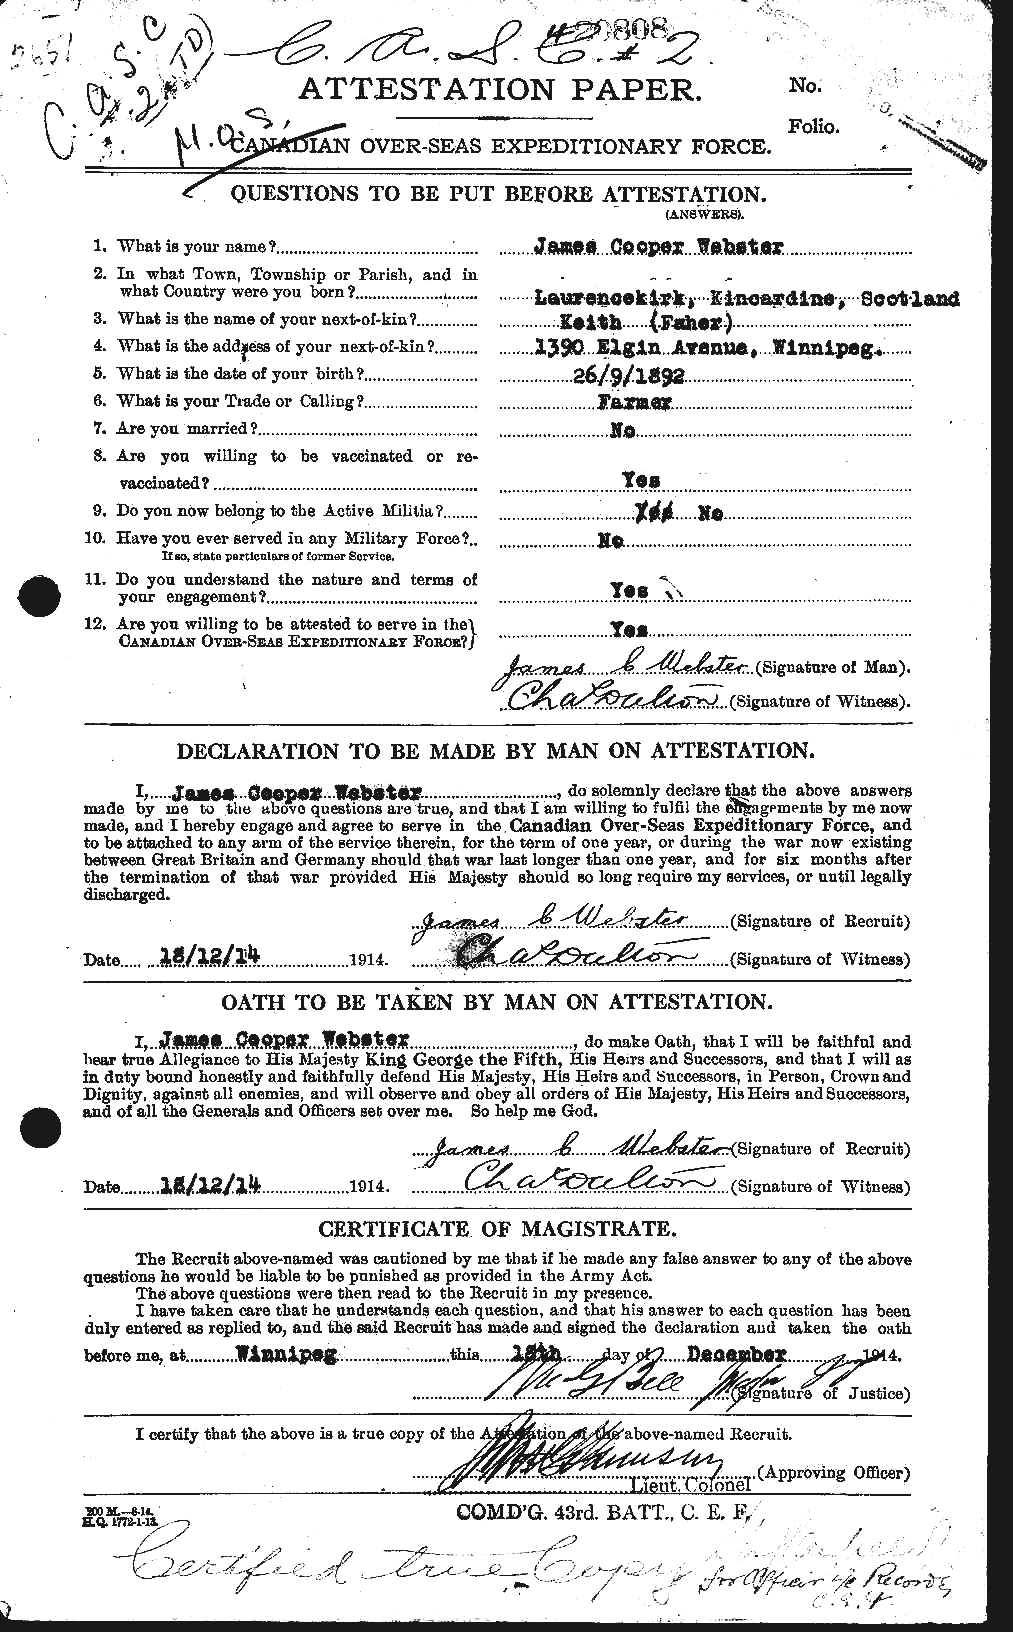 Personnel Records of the First World War - CEF 670453a